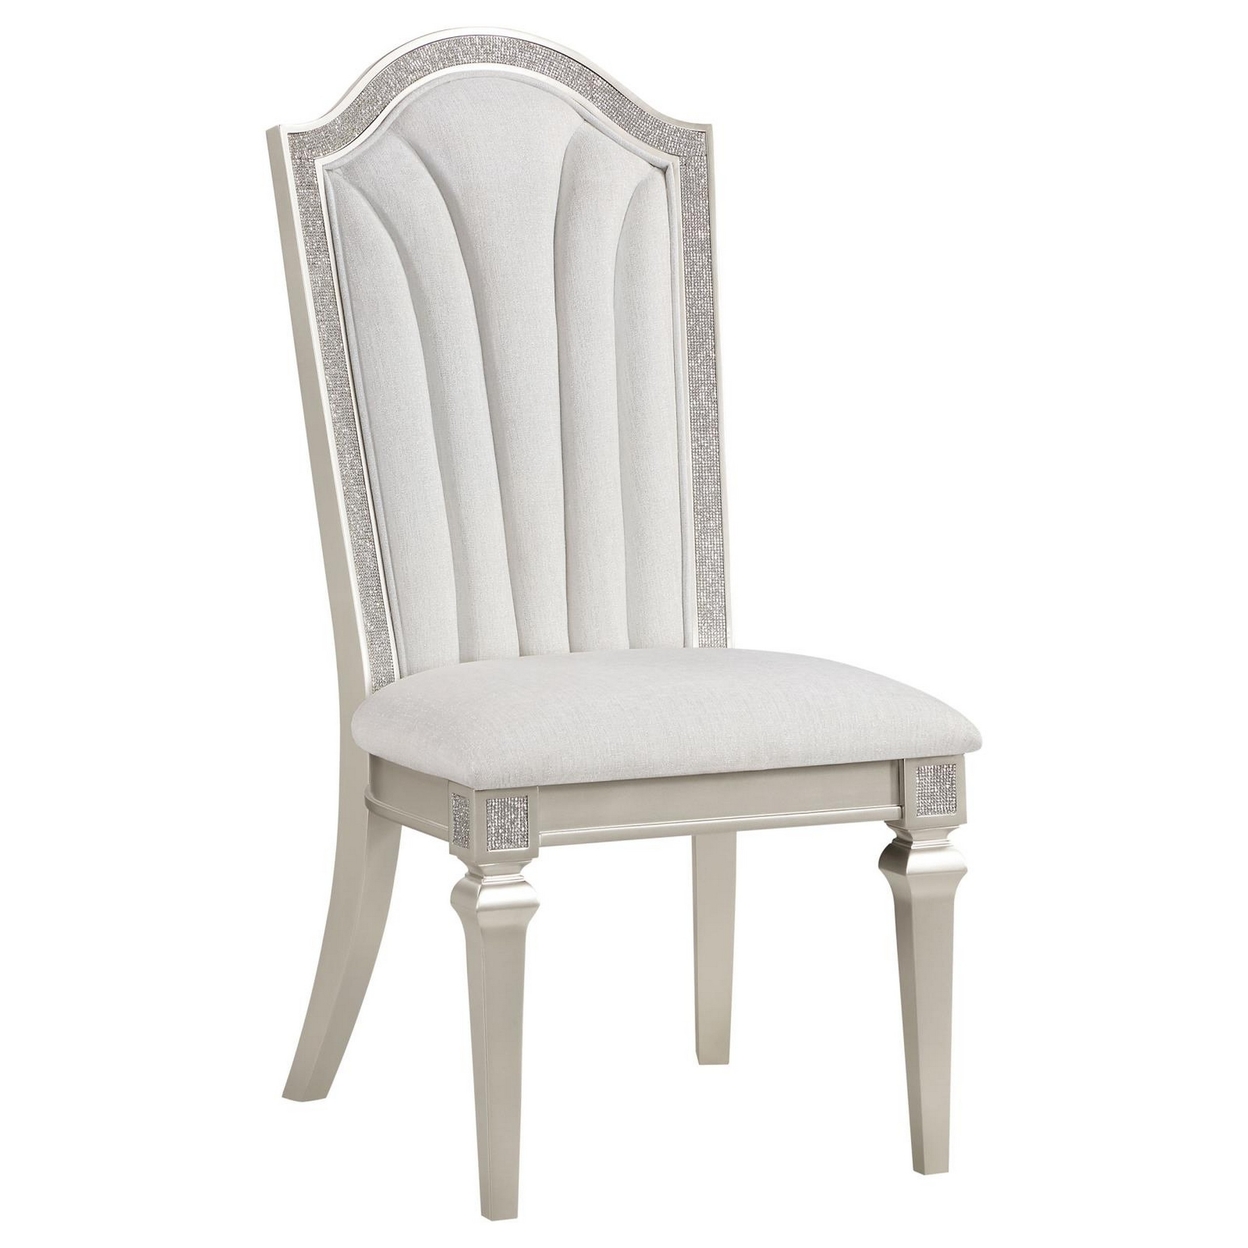 Nive 20 Inch Set Of 2 Dining Chairs, Tall Arch Back, Silver, Ivory Chenille-Saltoro Sherpi